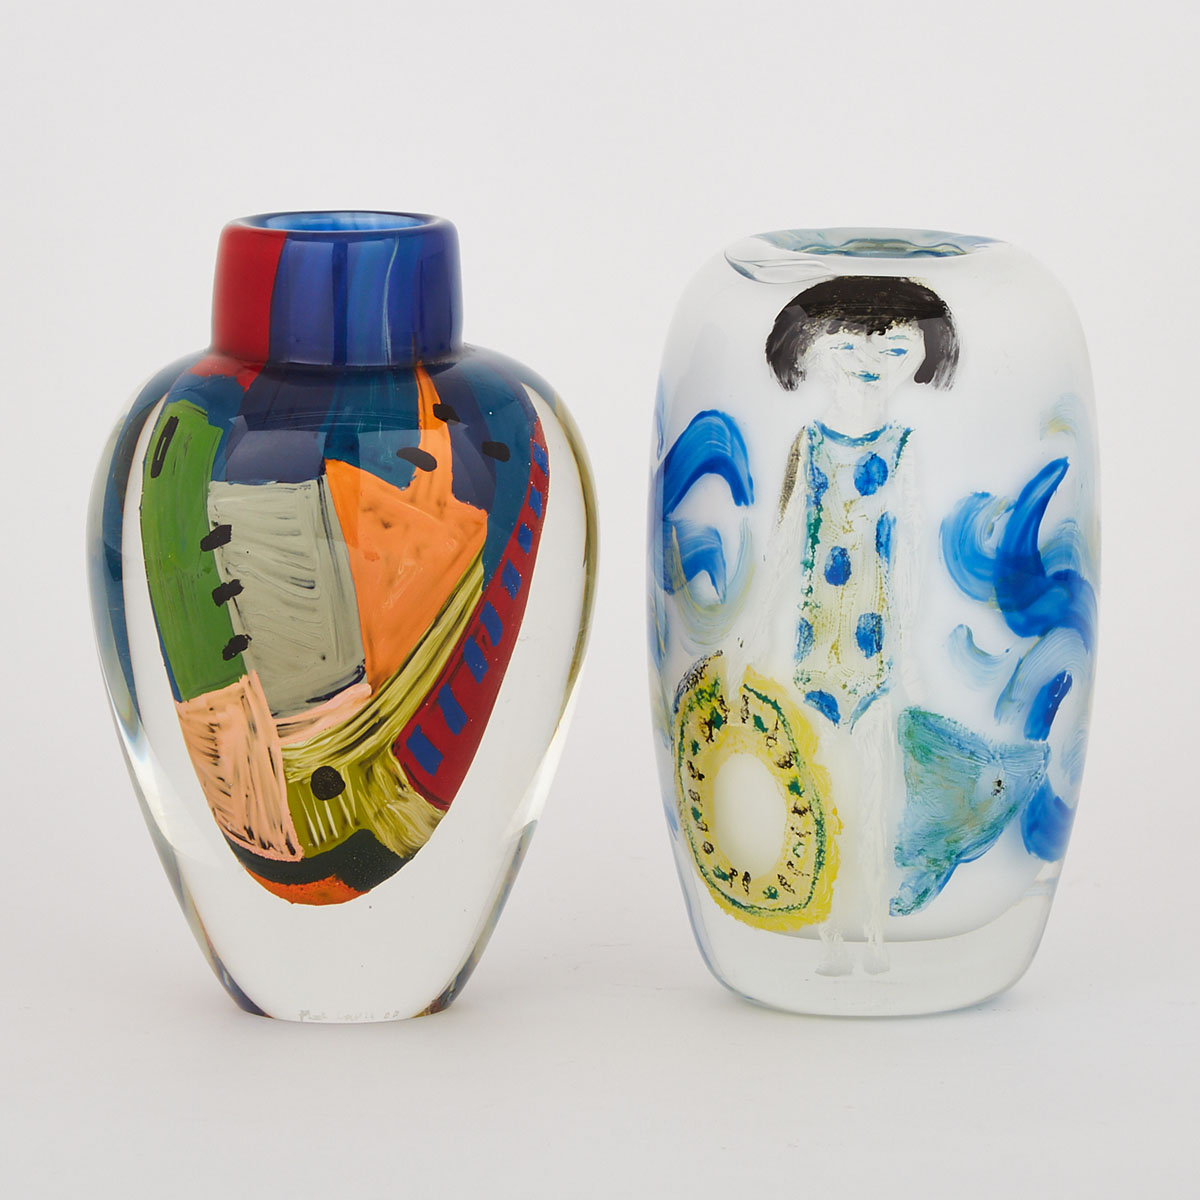 Mark Lewis (Canadian, b.1958) 
Internally Decorated Paperweight Glass Vase, 2000, and Another, c.2000